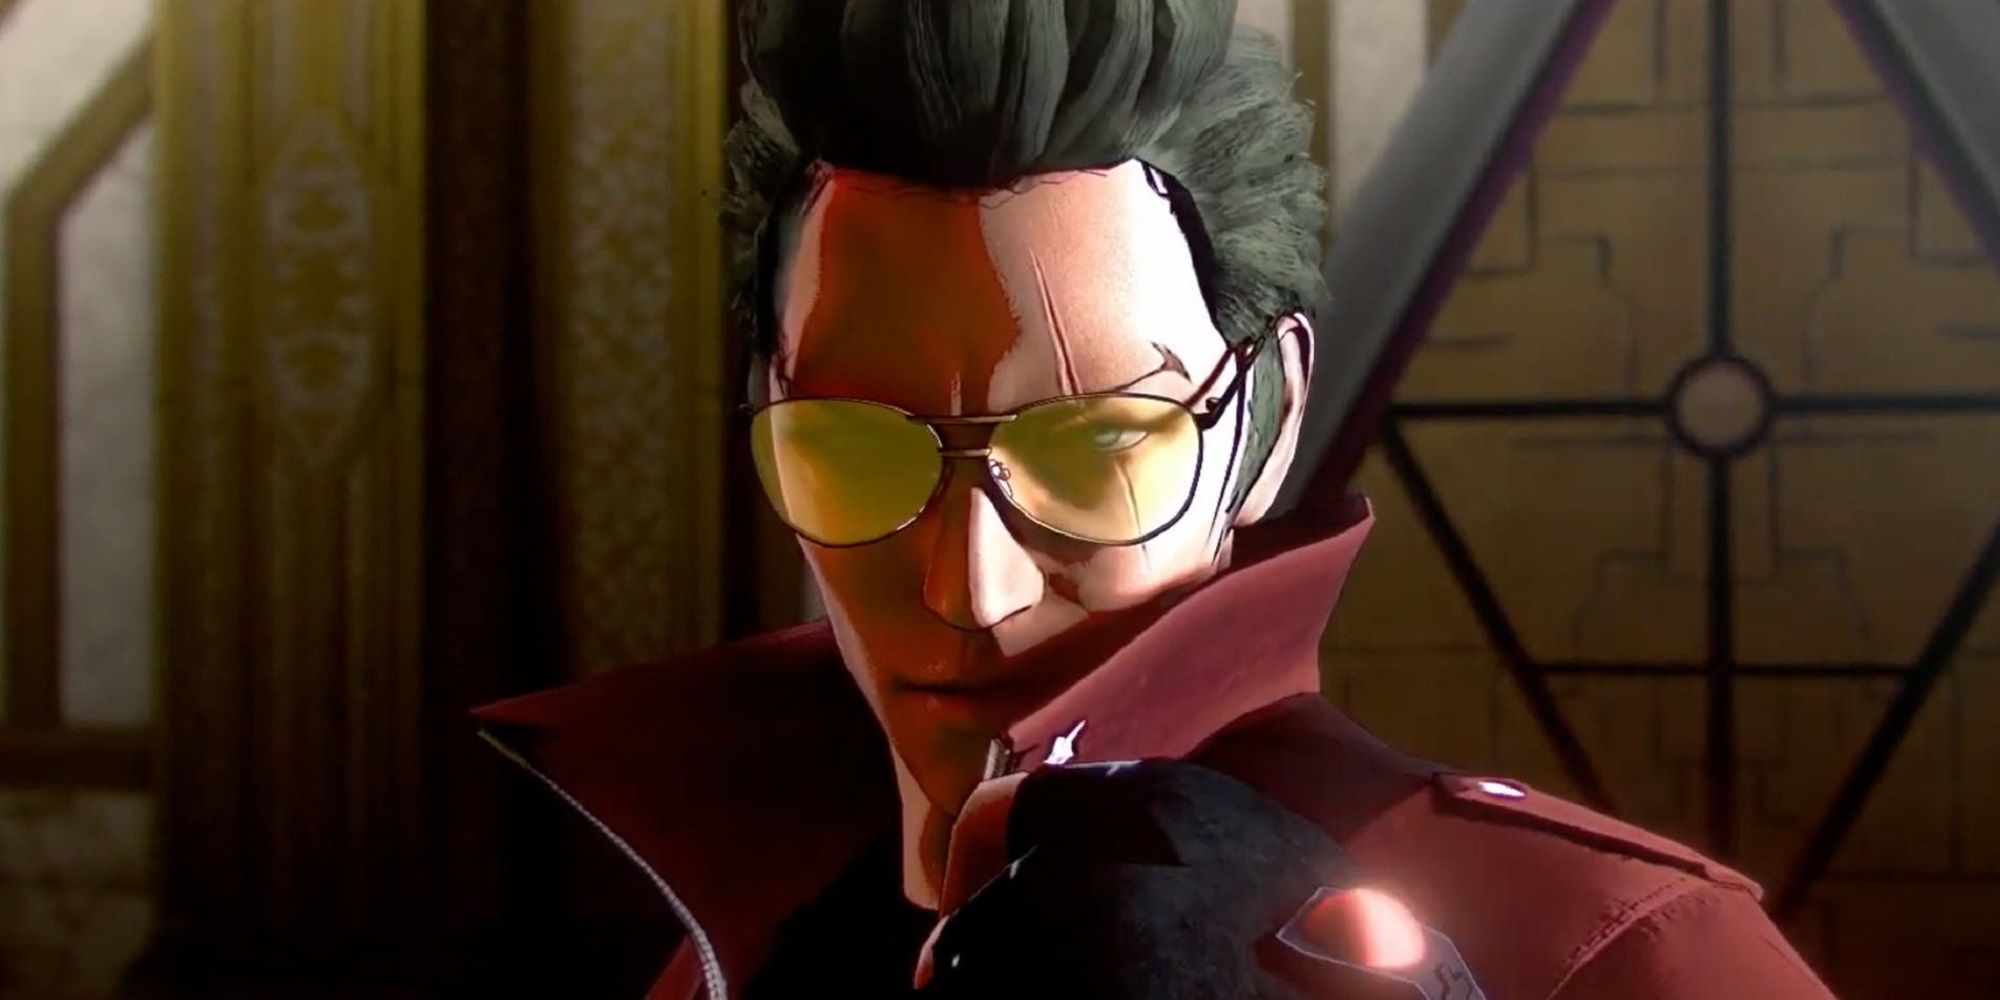 No More Heroes 3 Travis Looking Upset At Camera With Yellow Sunglasses